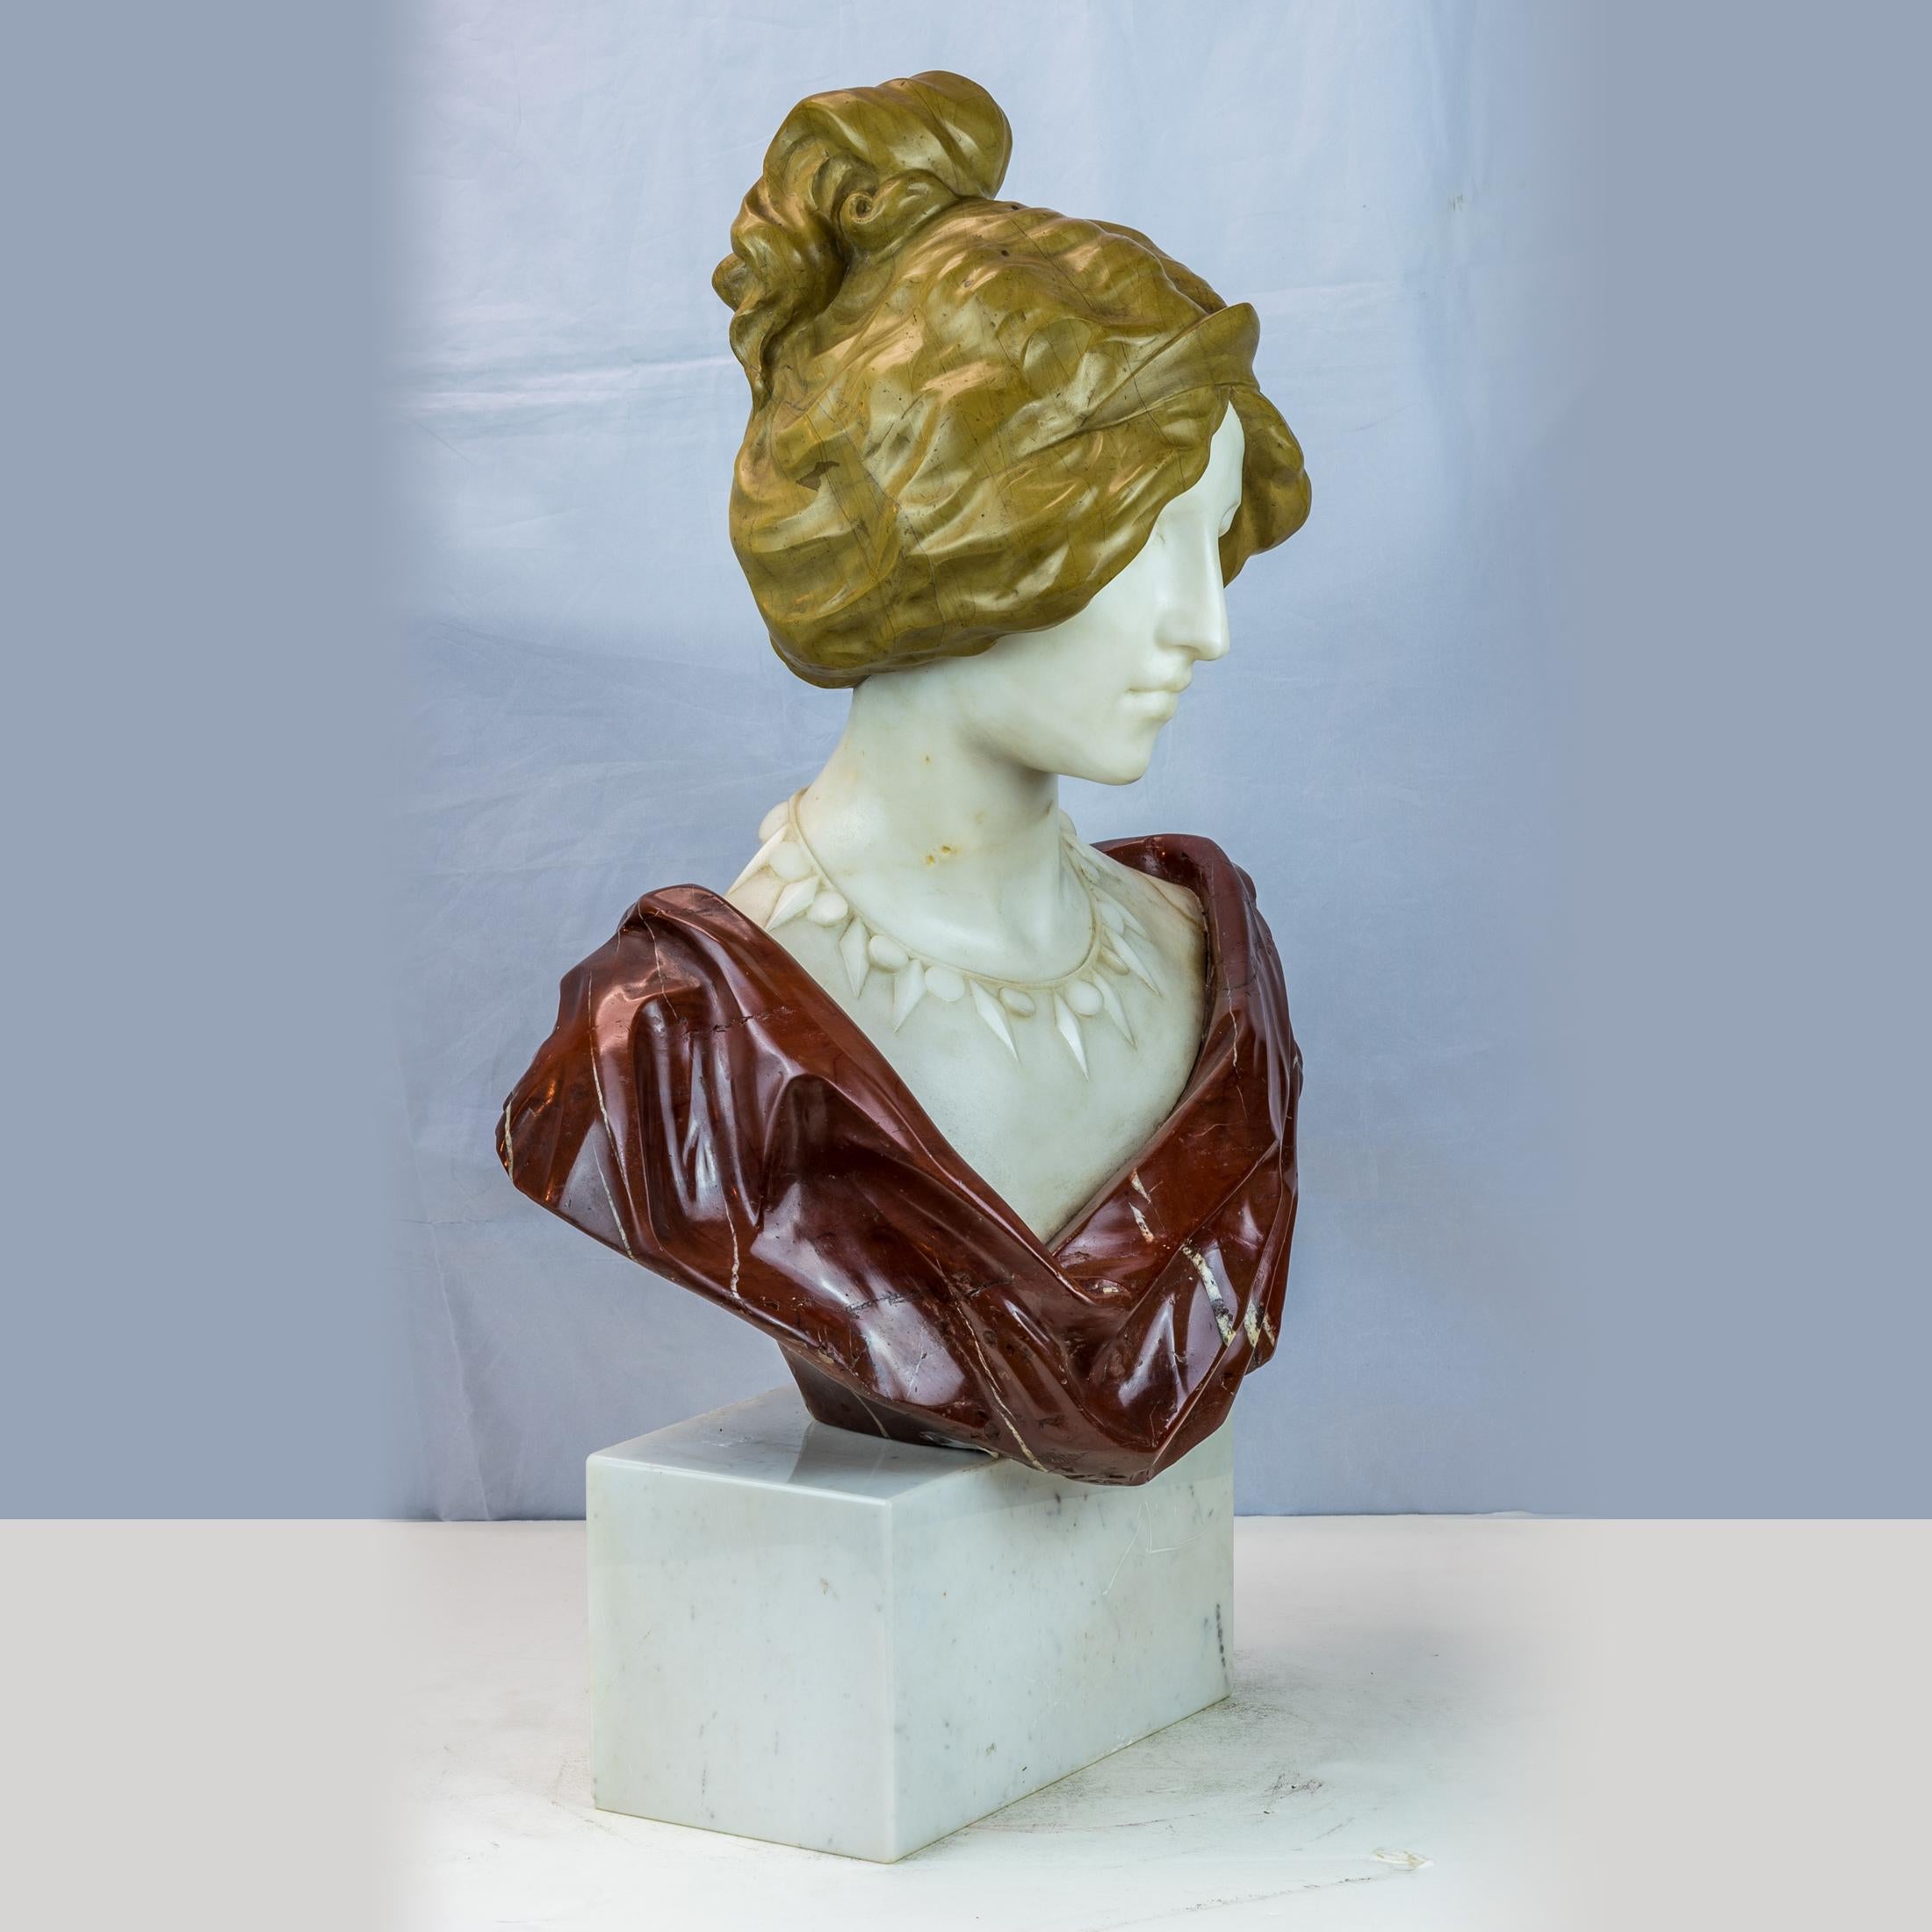 A Fine Colorful French Variegated Marble Bust of a Young Lady

Origin: French
Date: circa 1880
Dimension: H: 25 in. x W: 17 in. x D: 10 in.